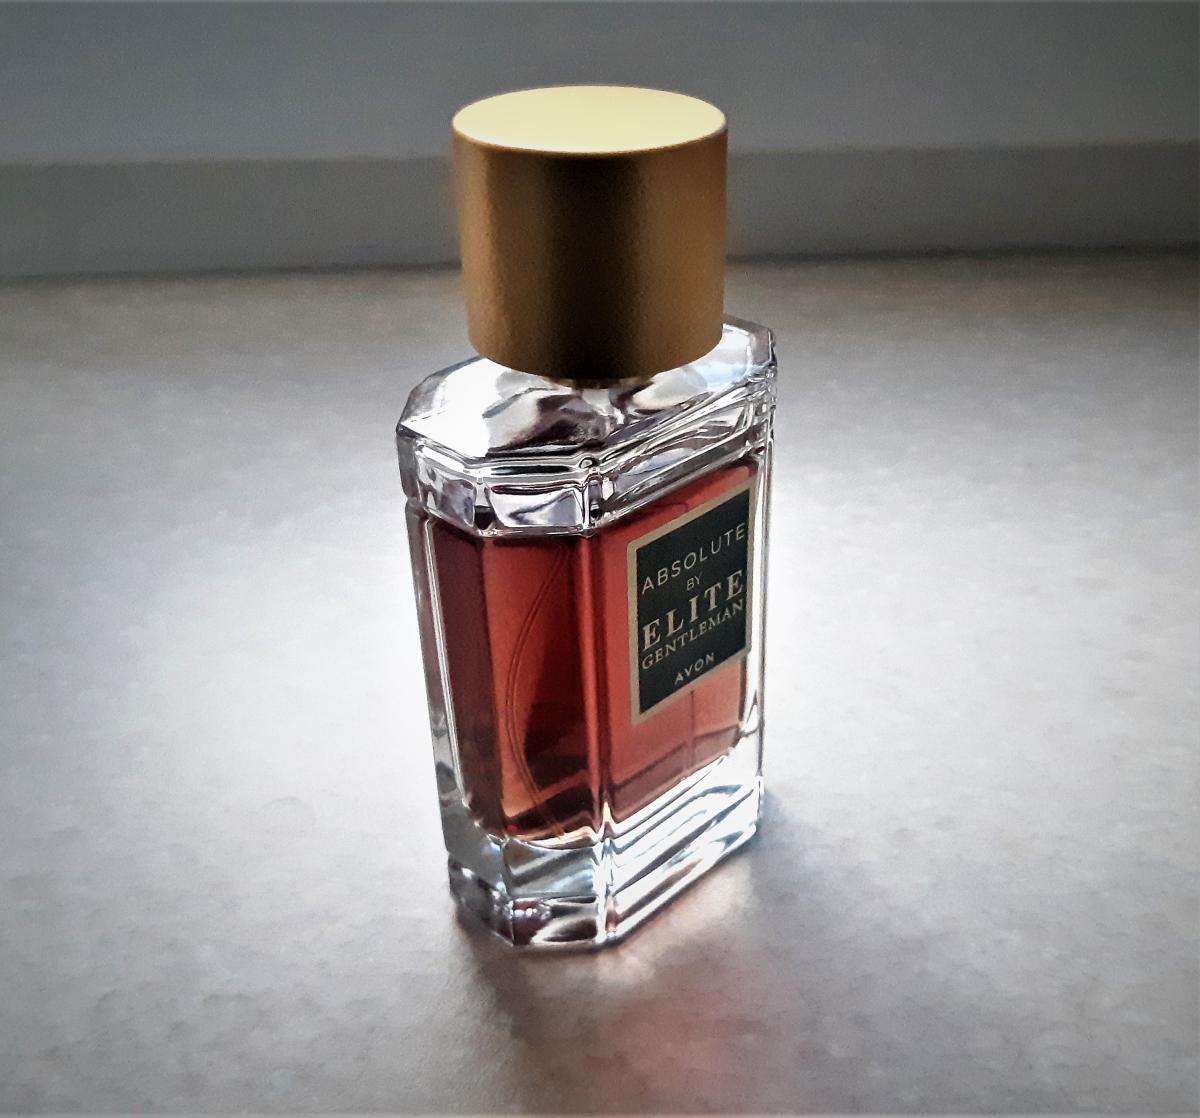 Absolute By Elite Gentleman Avon cologne - a fragrance for men 2020